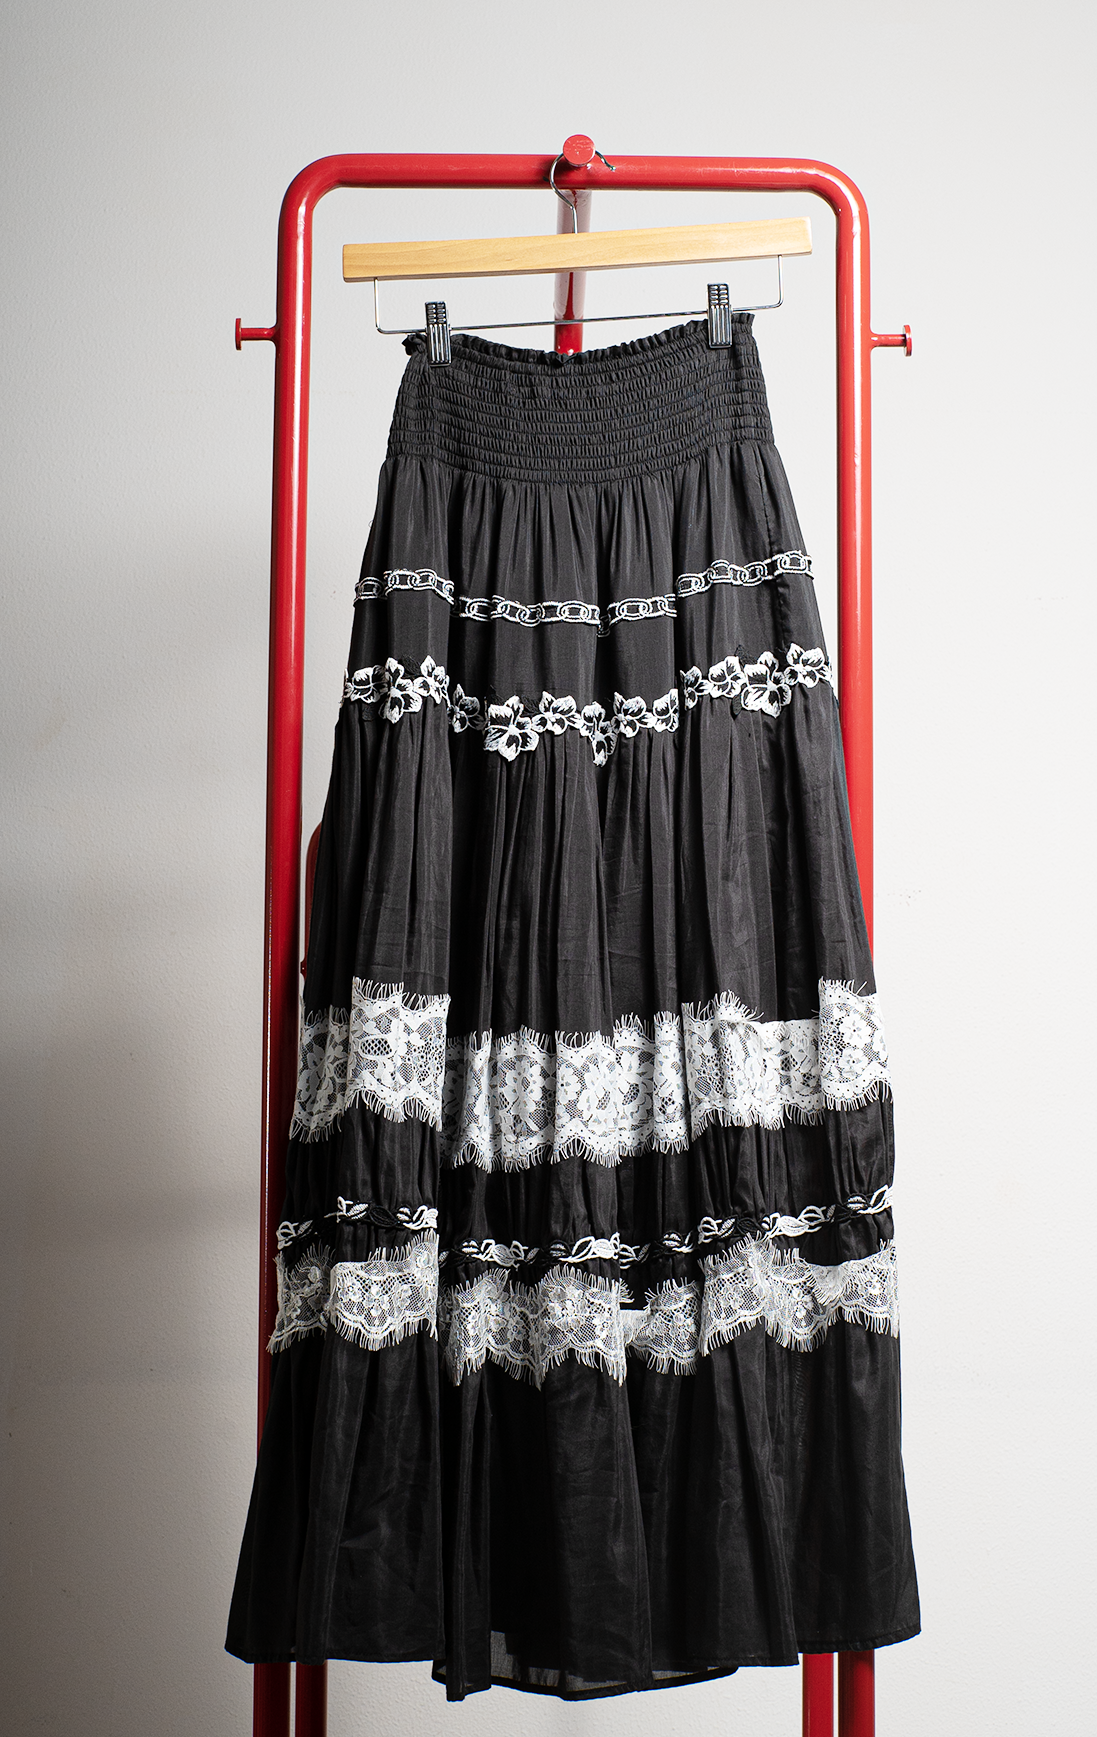 PINKO SKIRT - Black with white lace details - XSmall